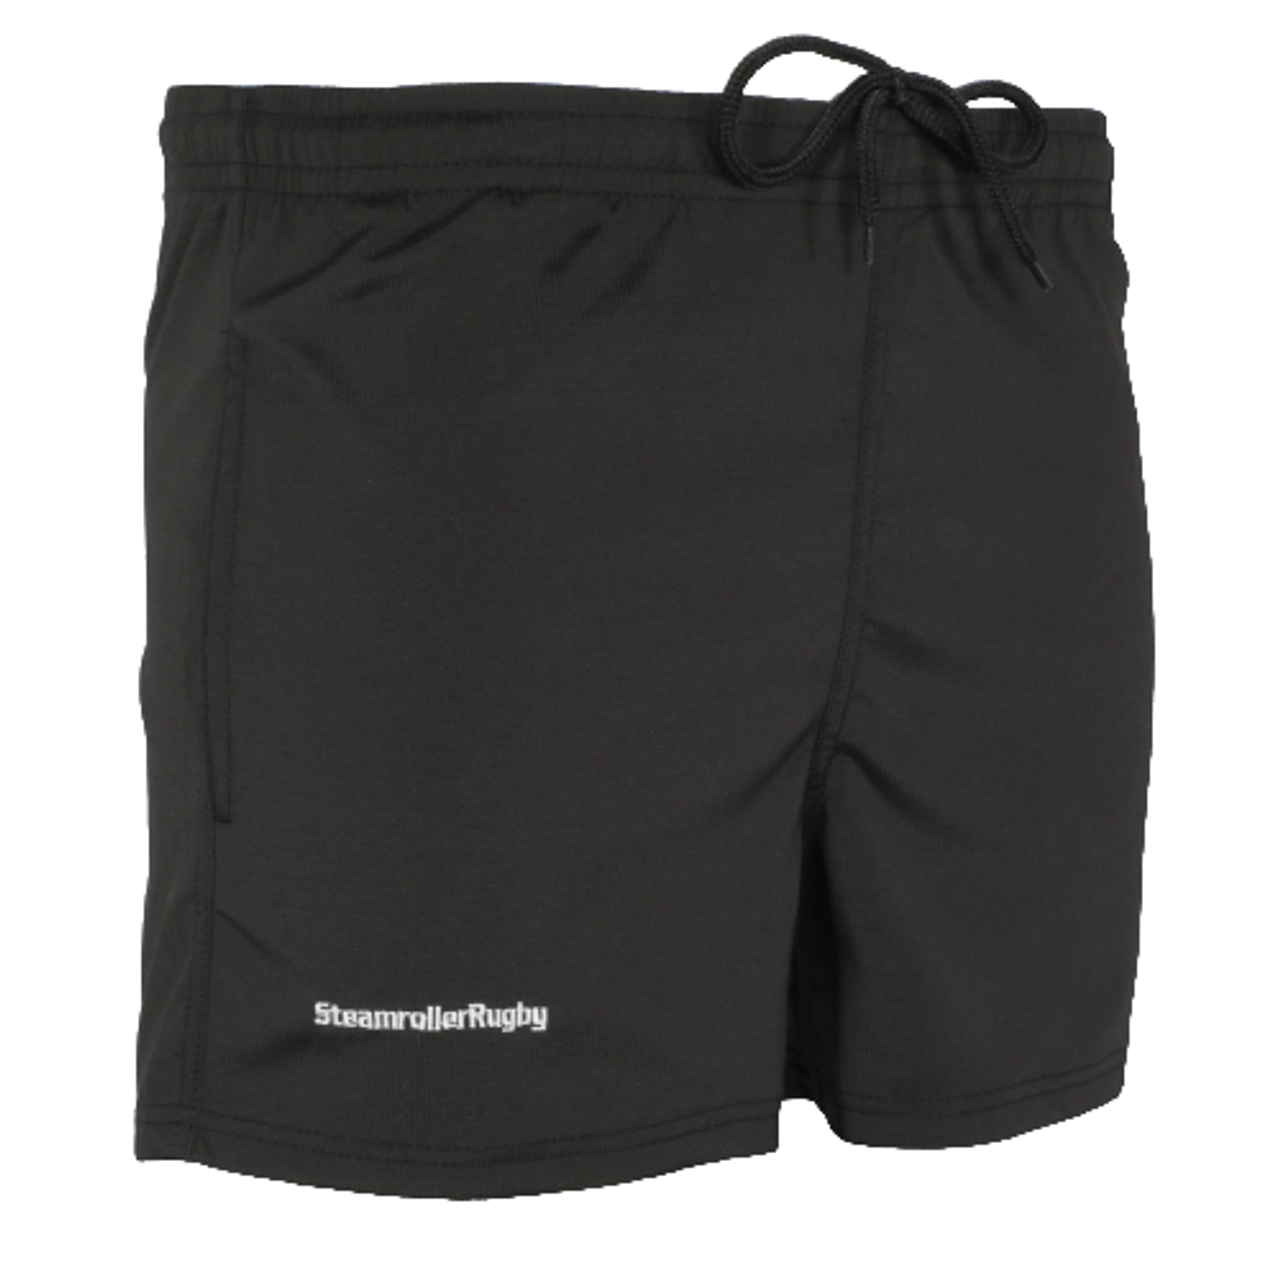 Rappahannock Golden Boars Pocketed Performance Rugby Shorts, Black